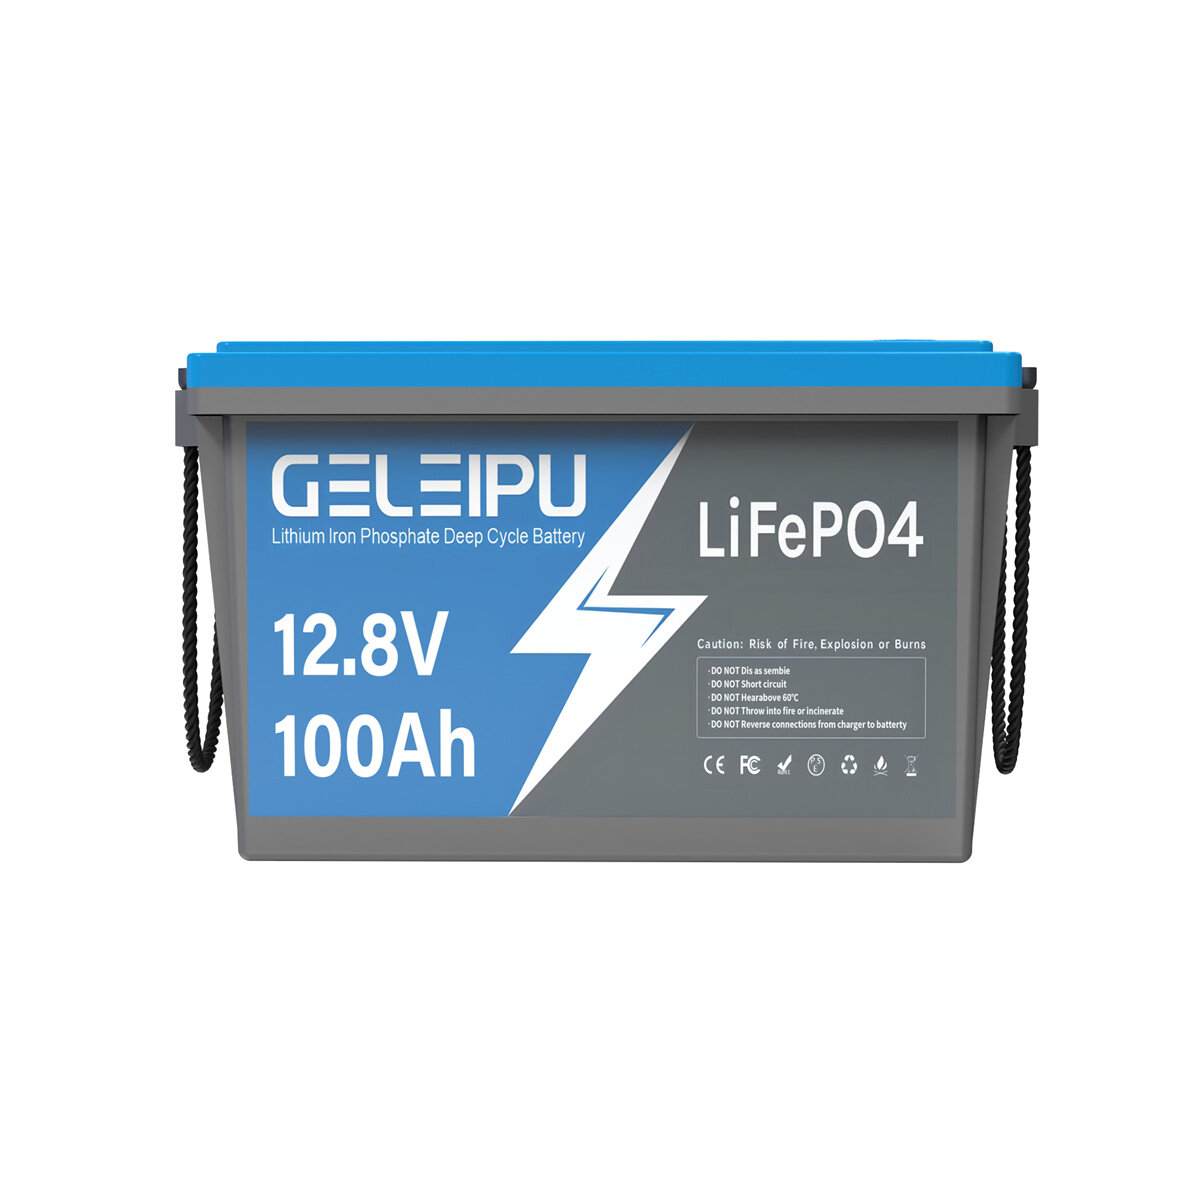 [EU Direct] GELEIPU 12V 12.8V 100Ah LiFePO4 Battery, 1280Wh Rechargeable Lithium Battery Built-in 100A BMS, with 4000-15000 Cycles, Perfect for Trolling Motor Solar System